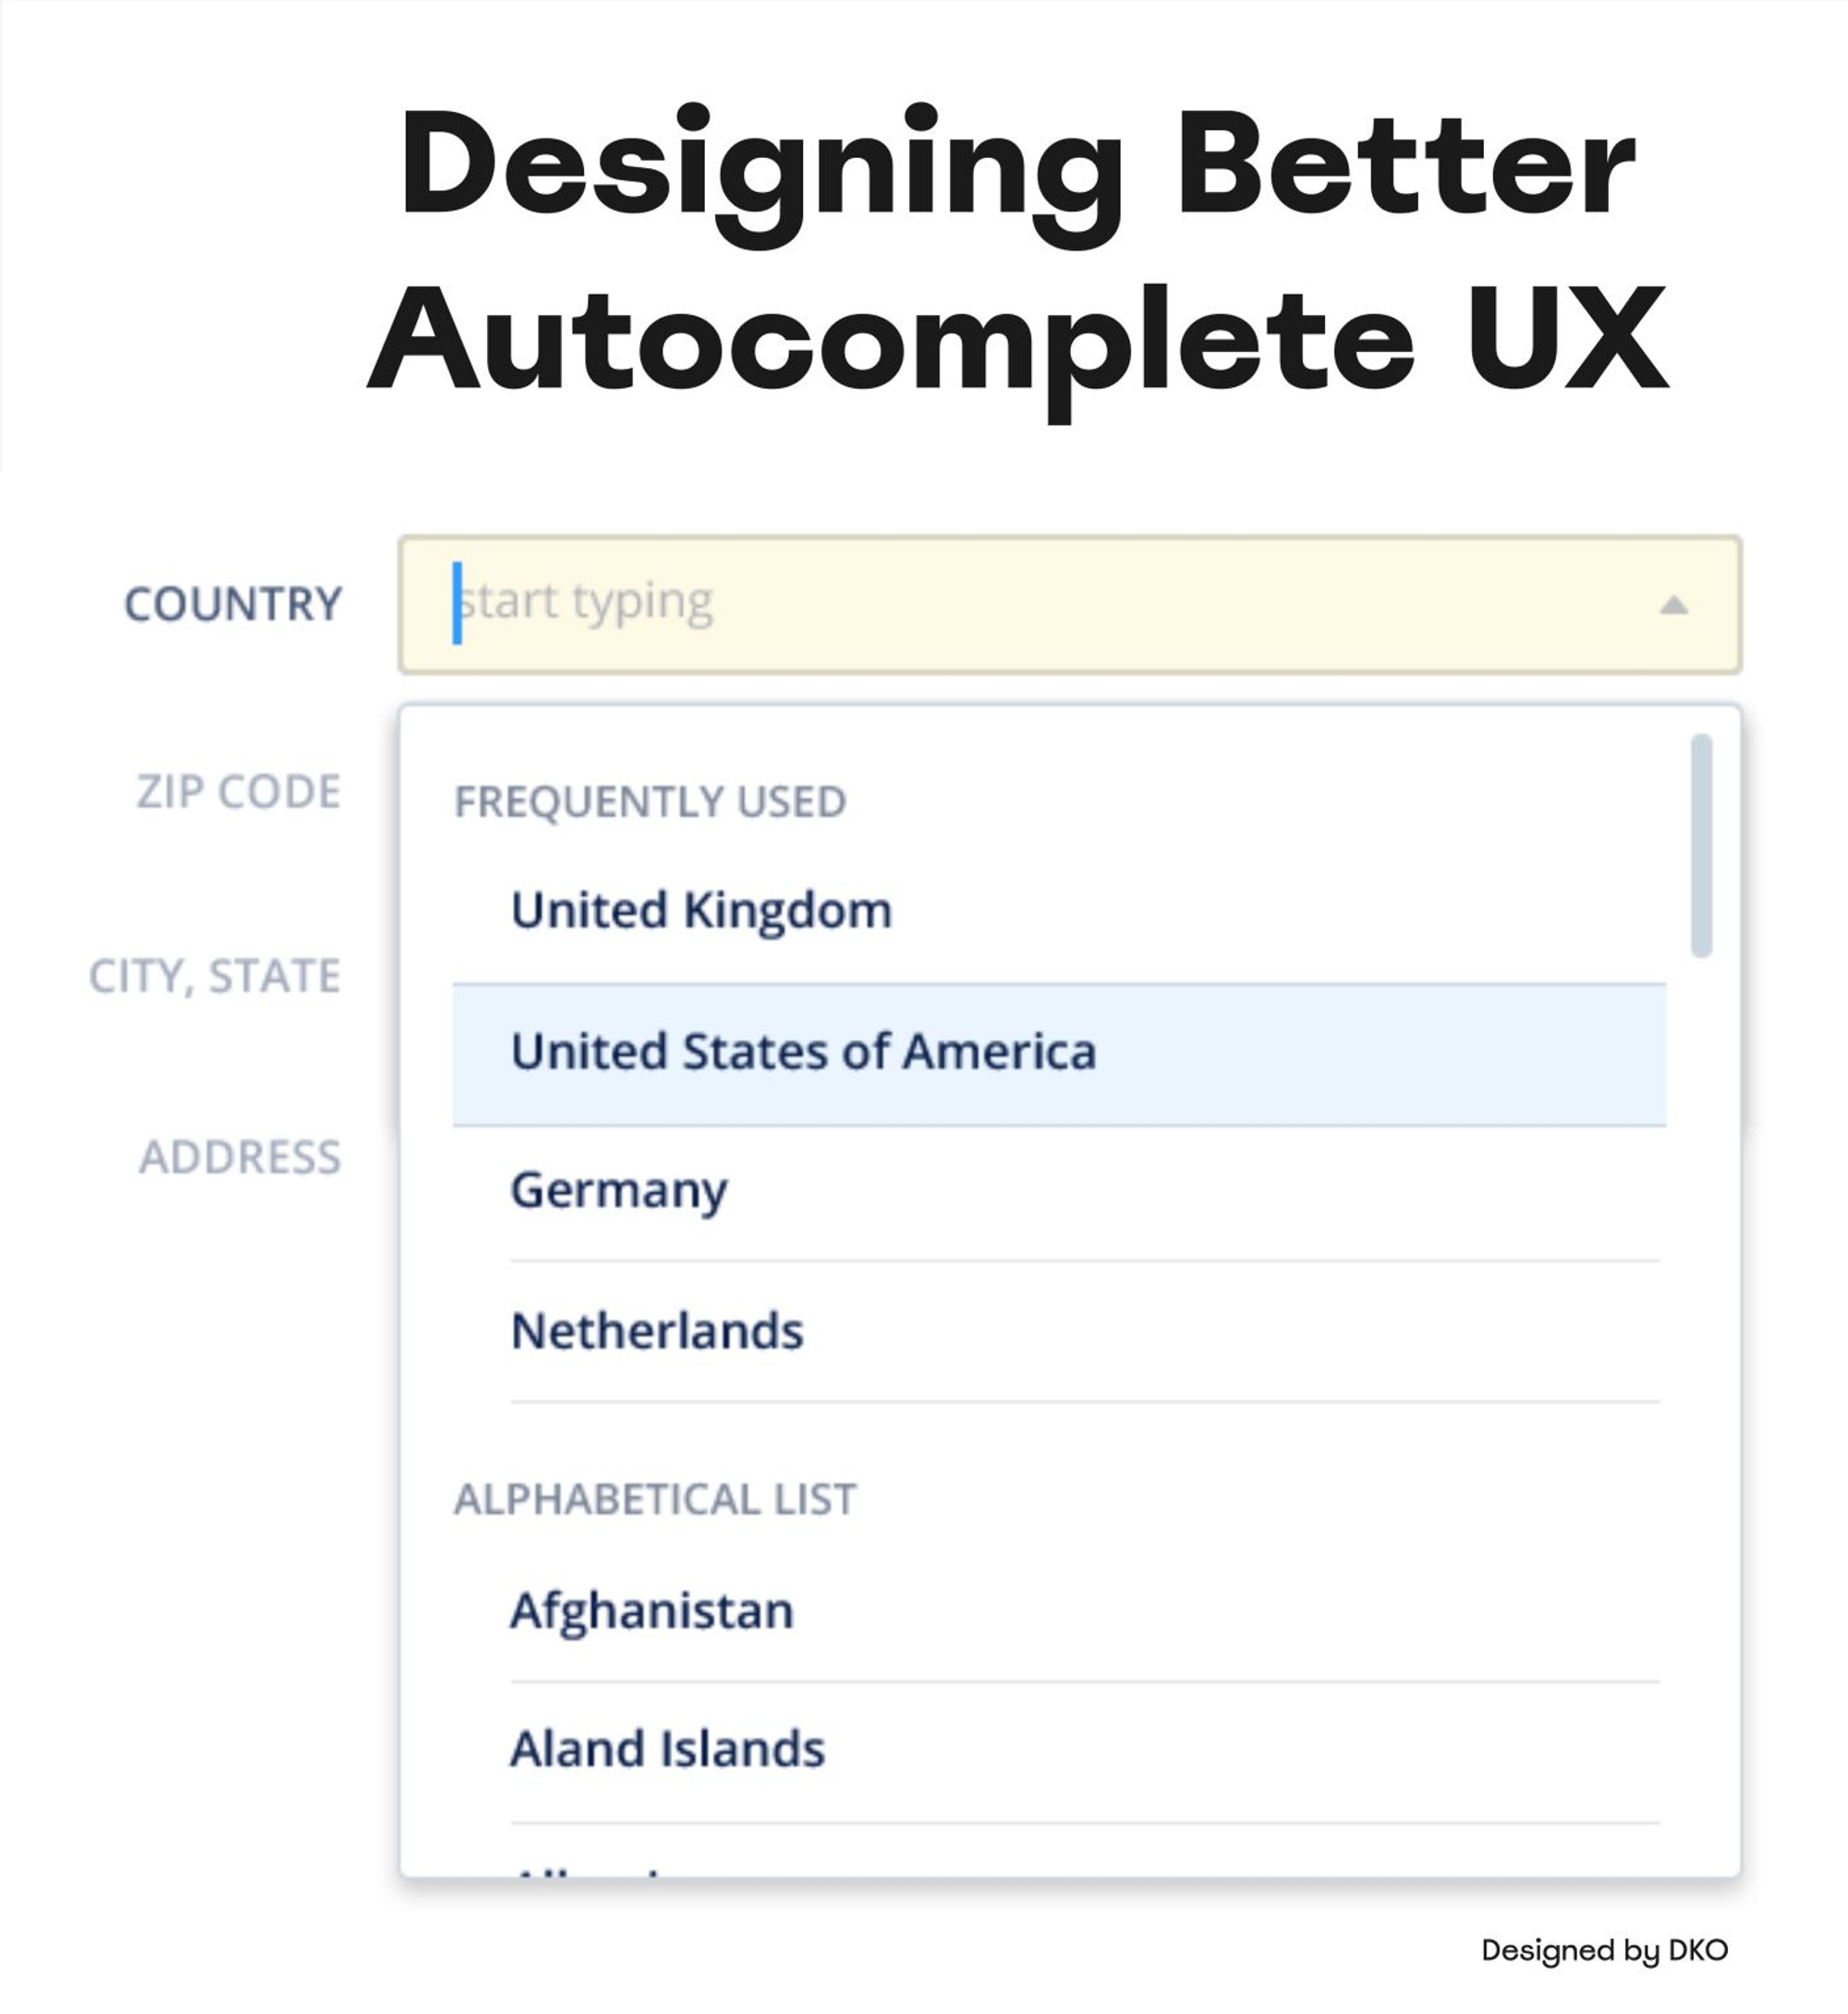 Designing Better Autocomplete UX by Vitaly Friedman